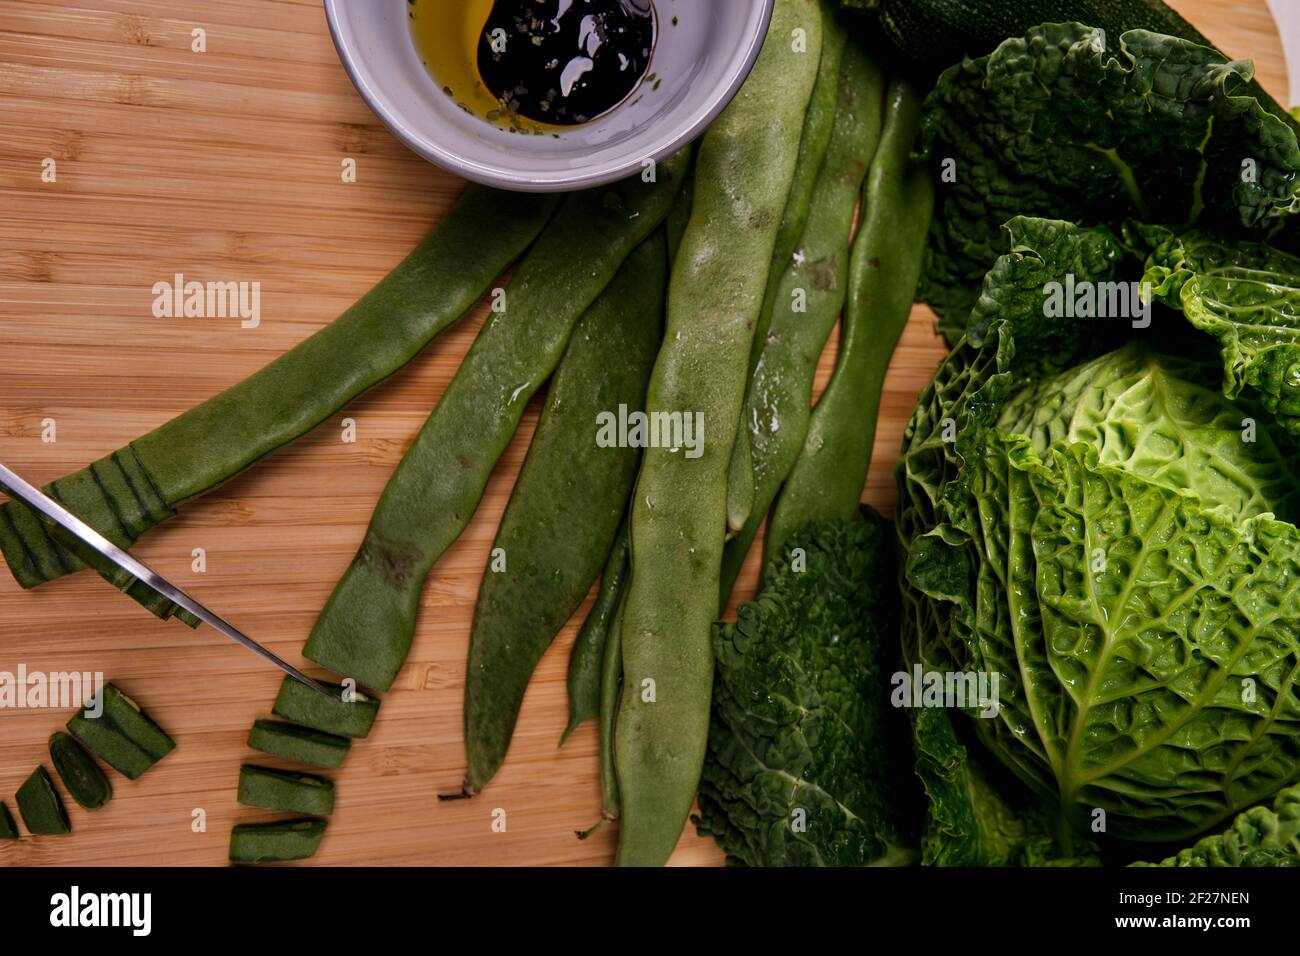 wealthy food, green meal Stock Photo